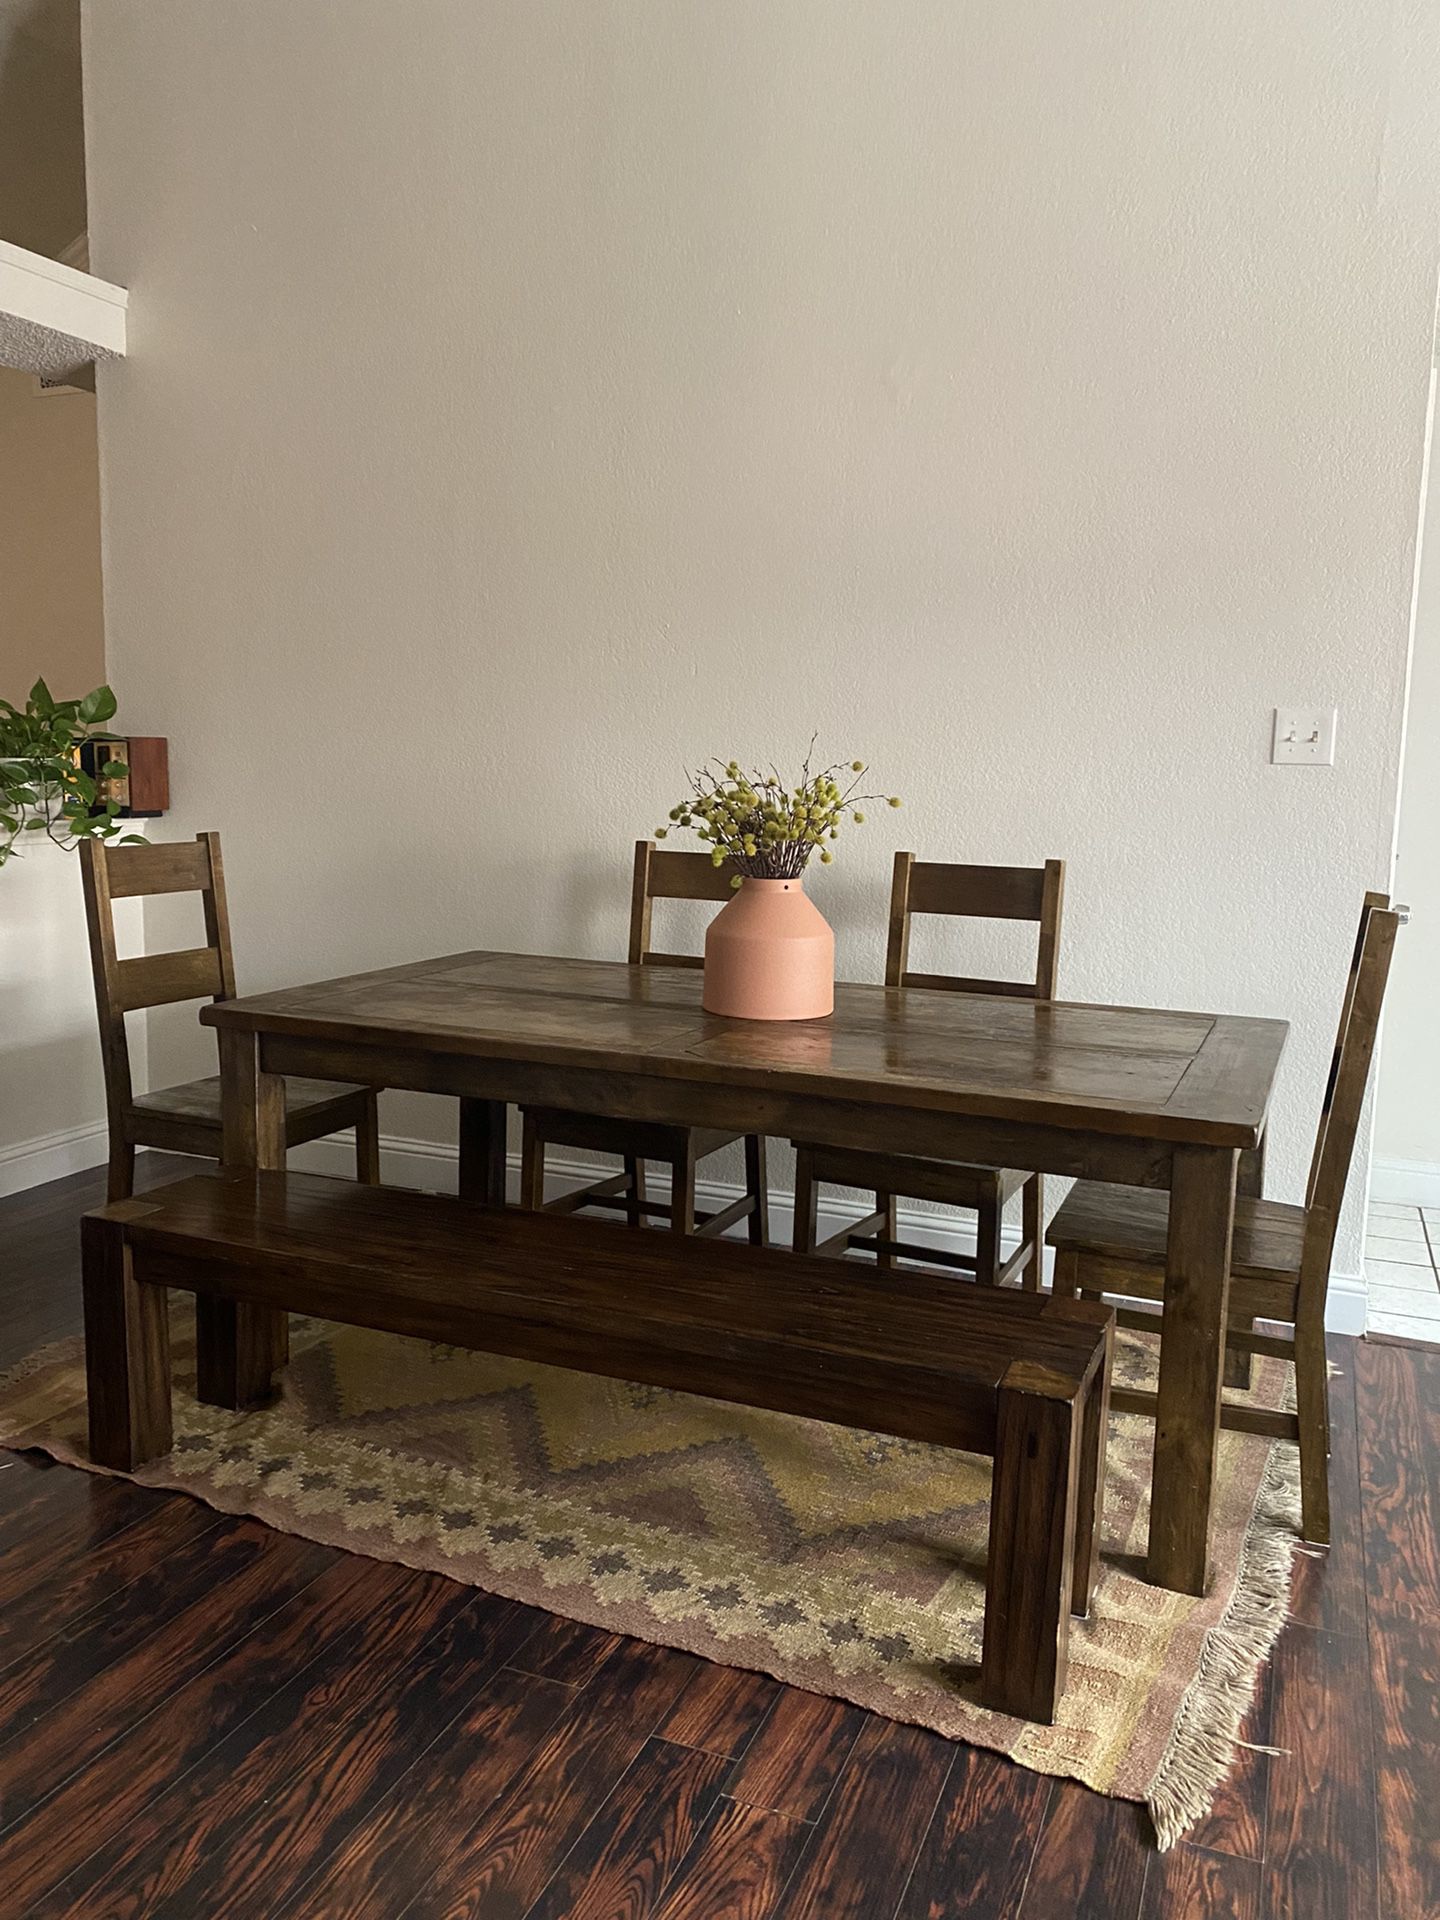 Rustic Dining Table 4 Chair And Bench 